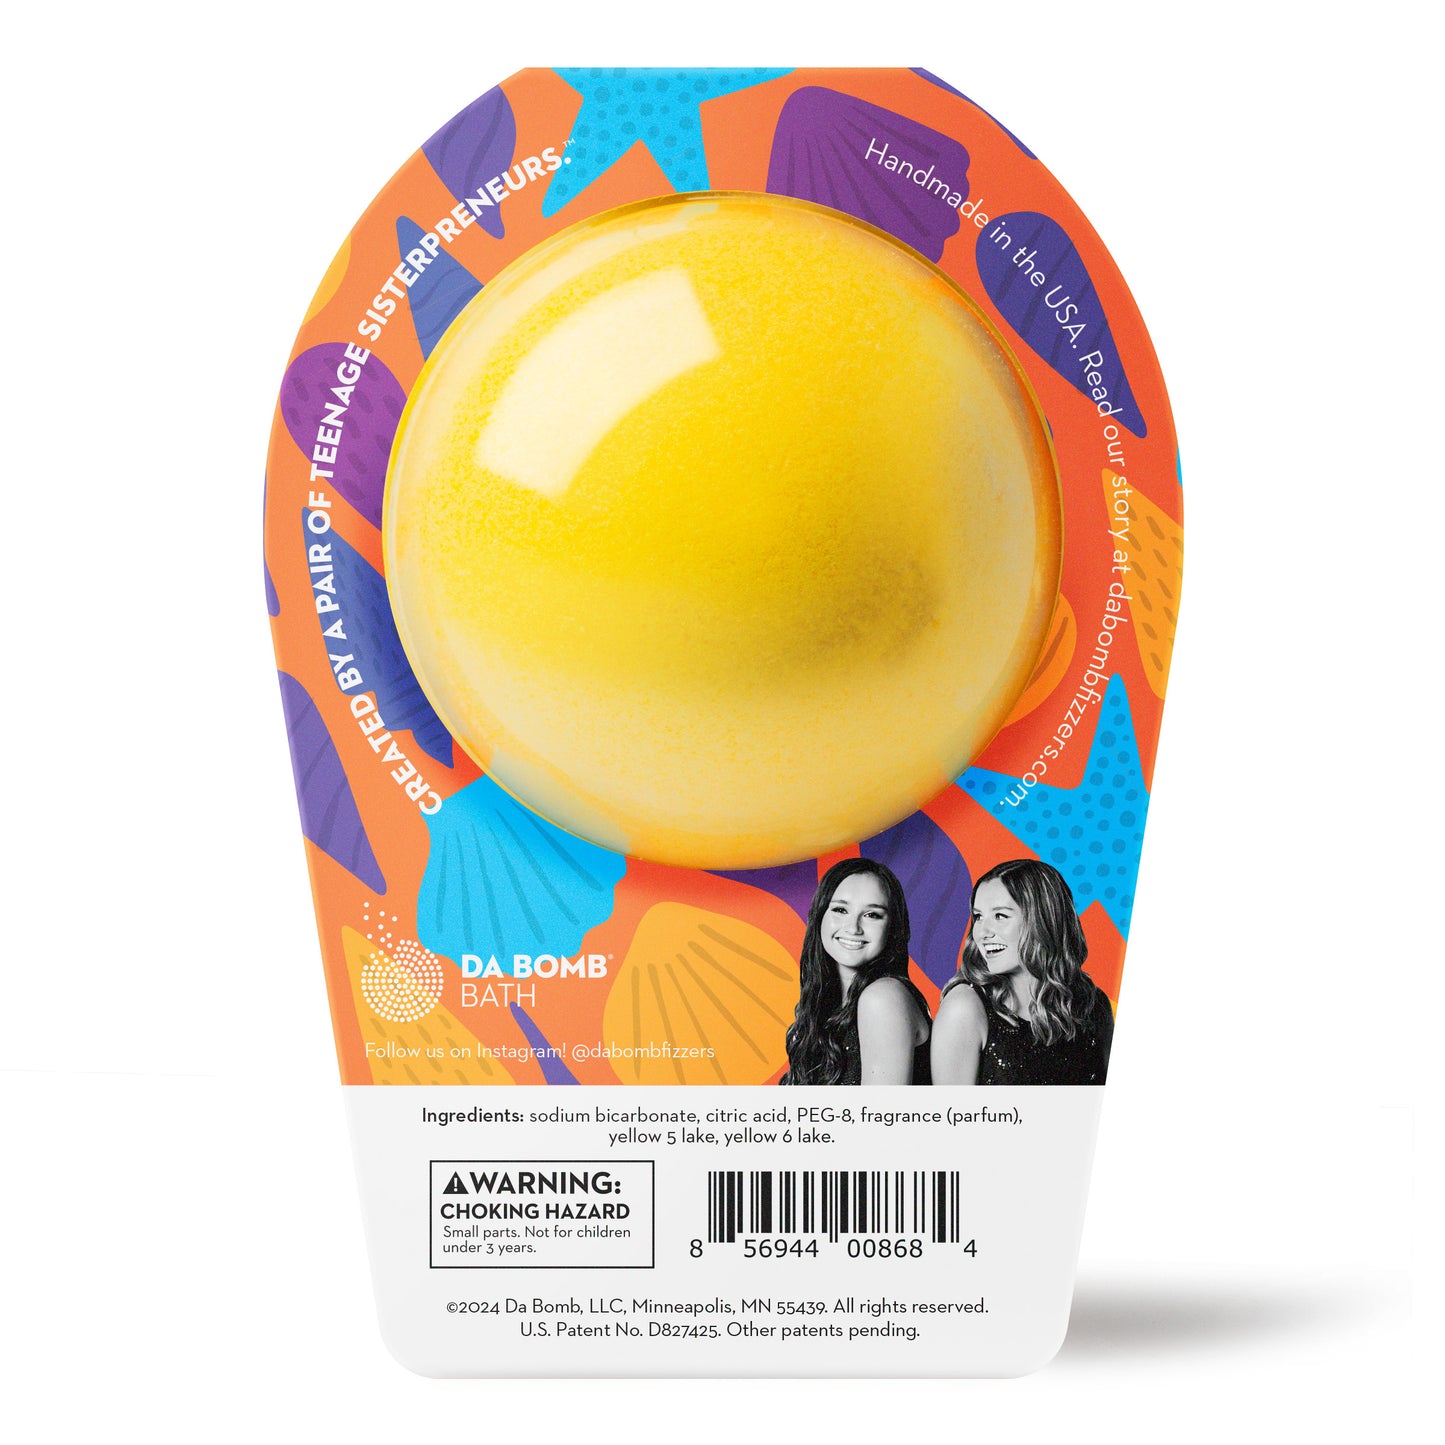 an orange and yellow bath bomb in orange shell pattern packaging 